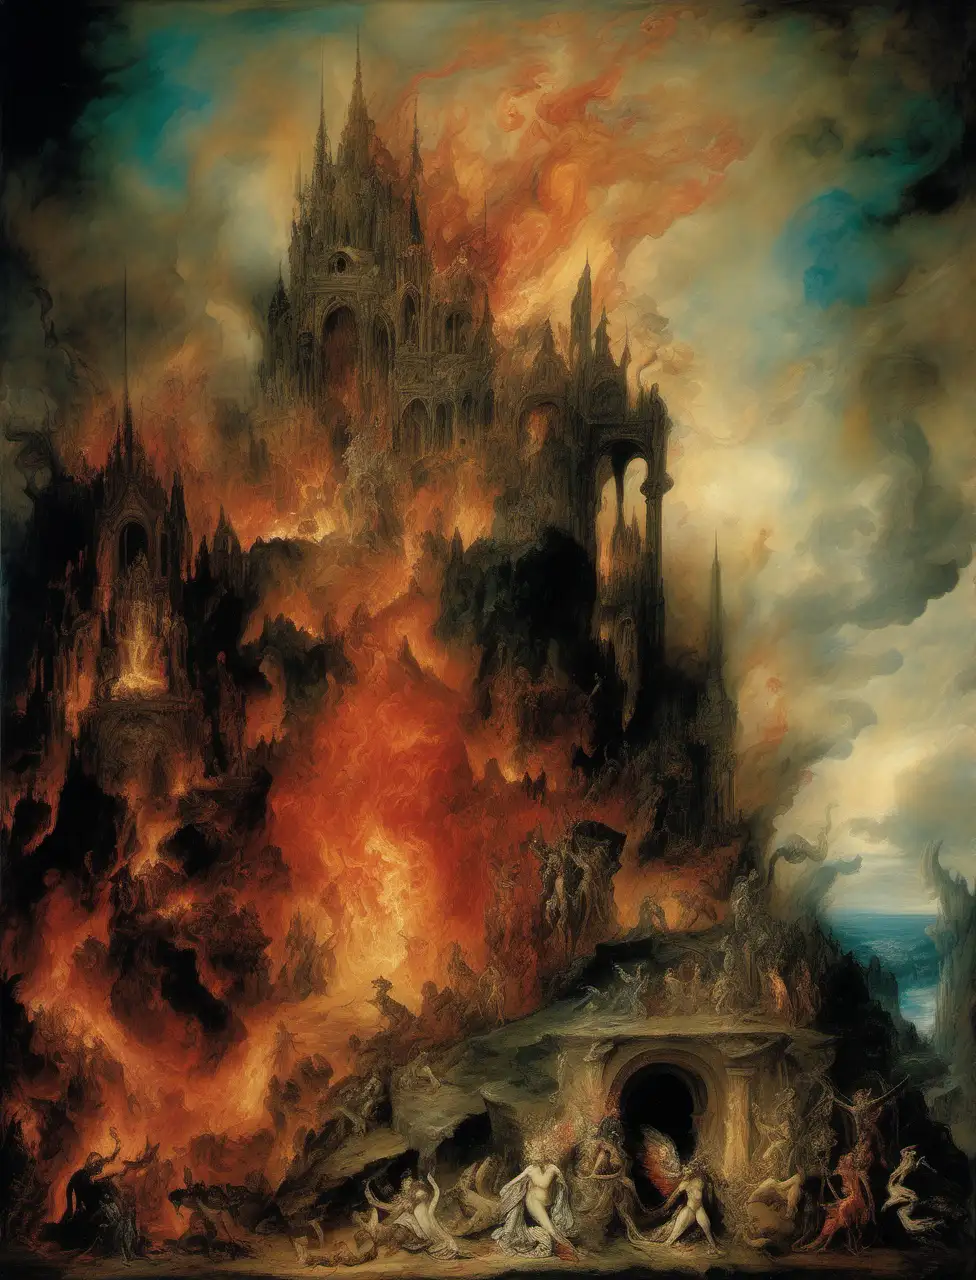 Satan Condemning Souls to Eternal Fire in Gustave MoreauInspired High Fantasy Hell